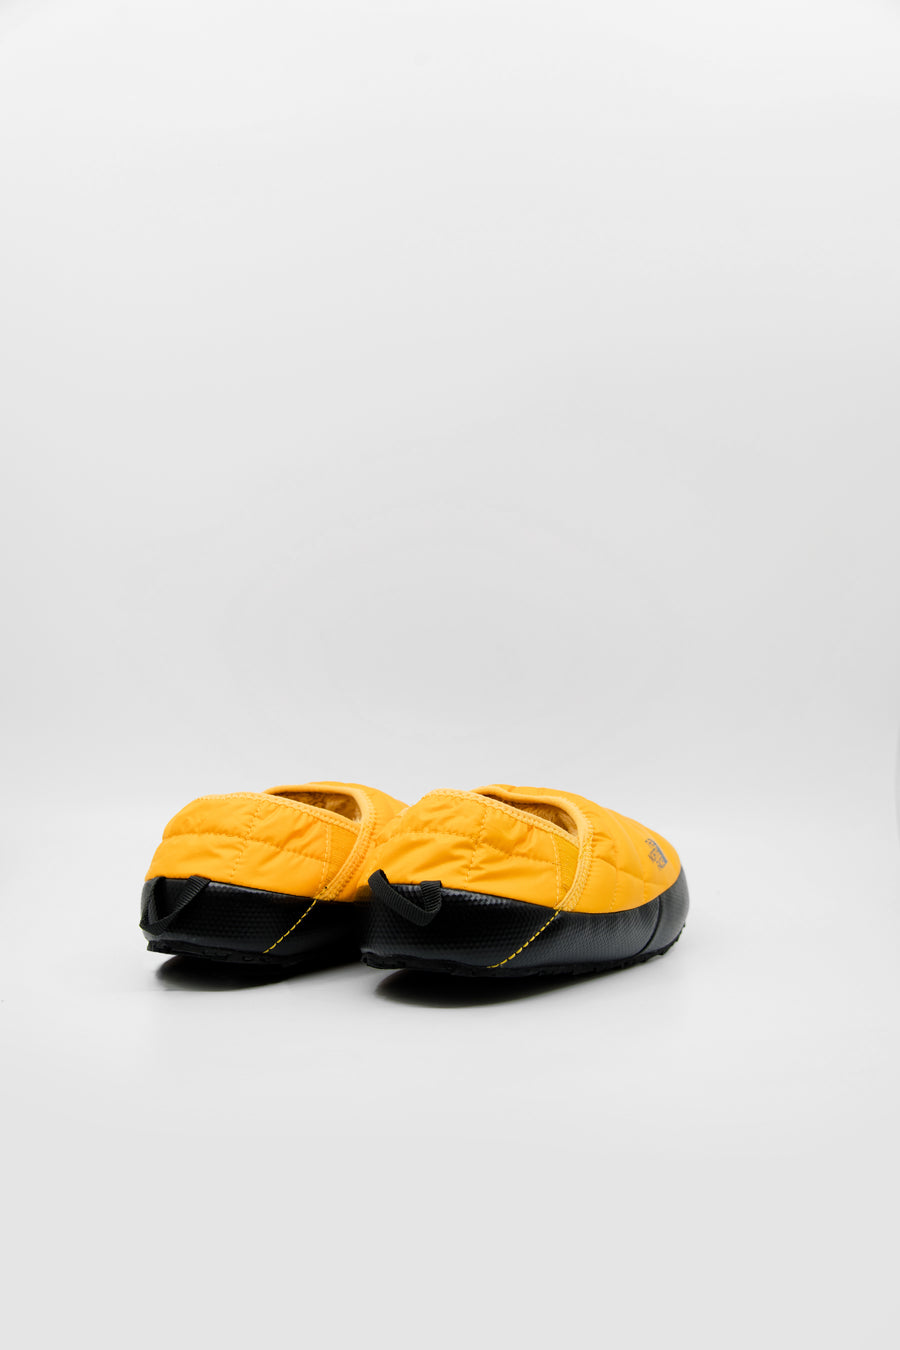 Thermoball Traction Mule V Summit Gold